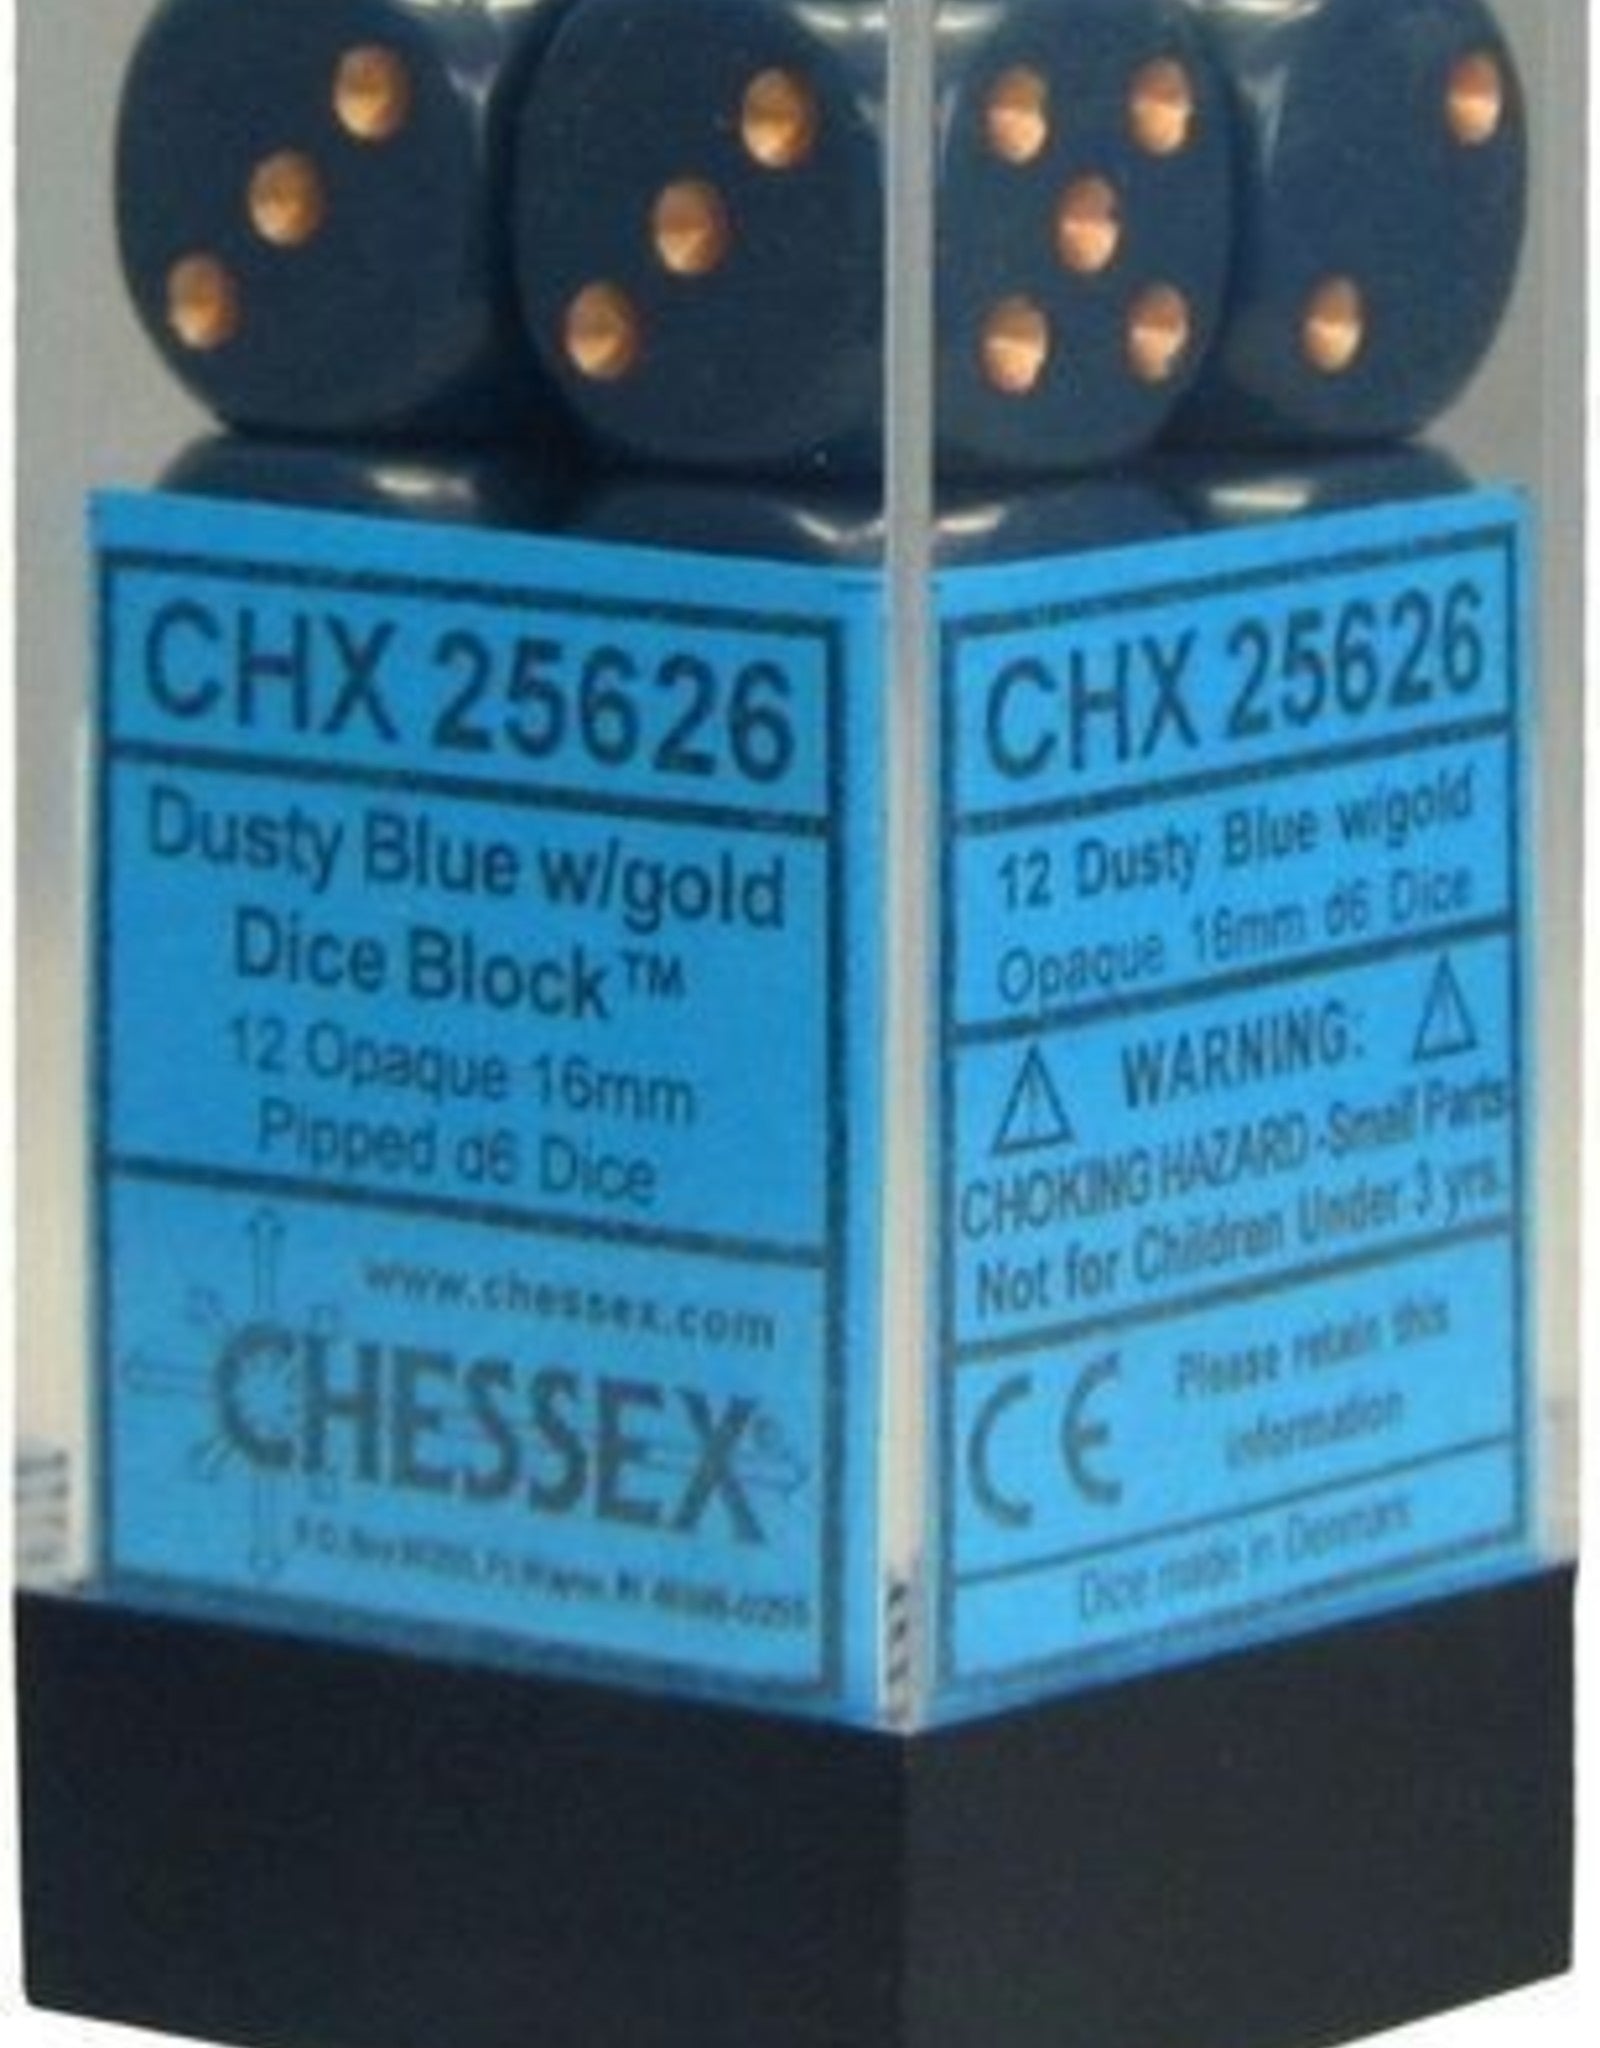 Chessex Dice: D6 Block 16mm - Opaque - Dusty Blue with Gold (CHX 25626) - Gamescape